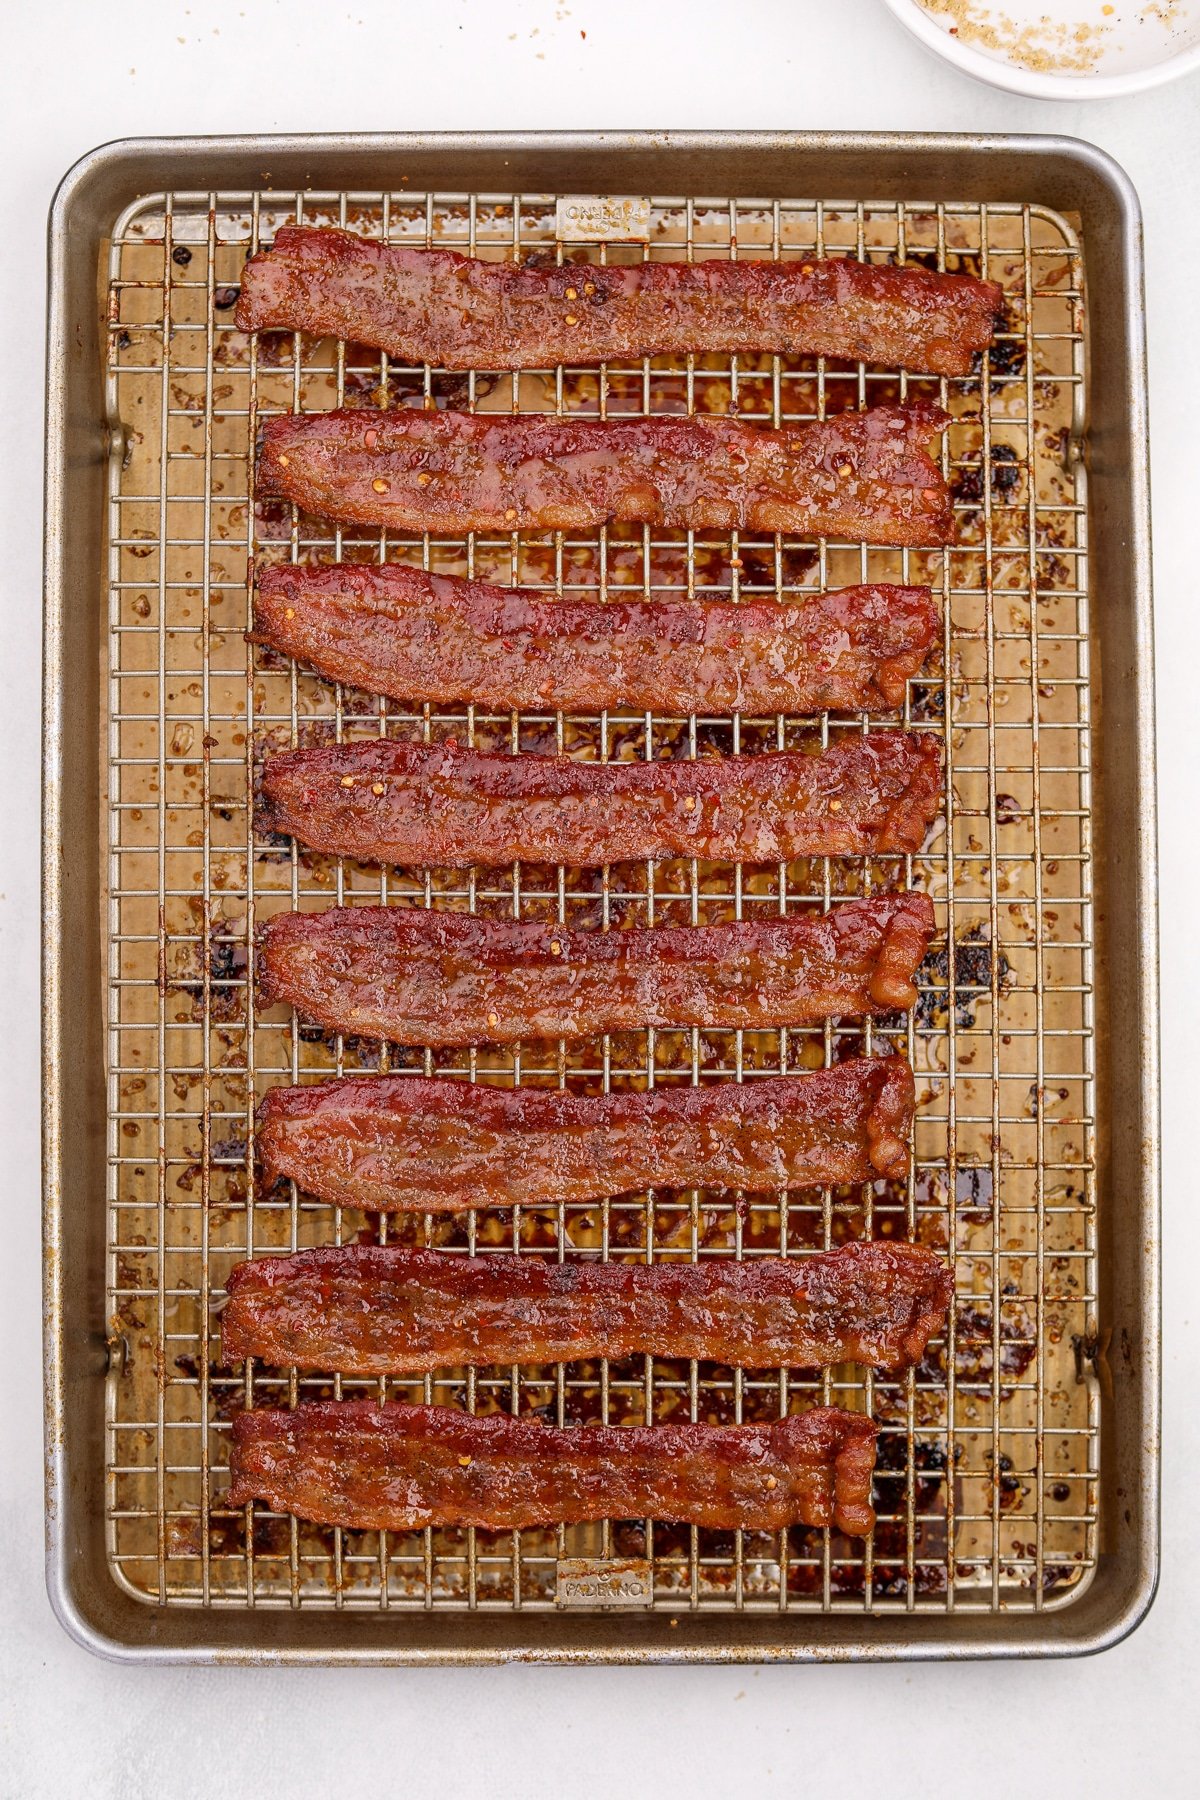 Cooked and candied bacon on a baking sheet.